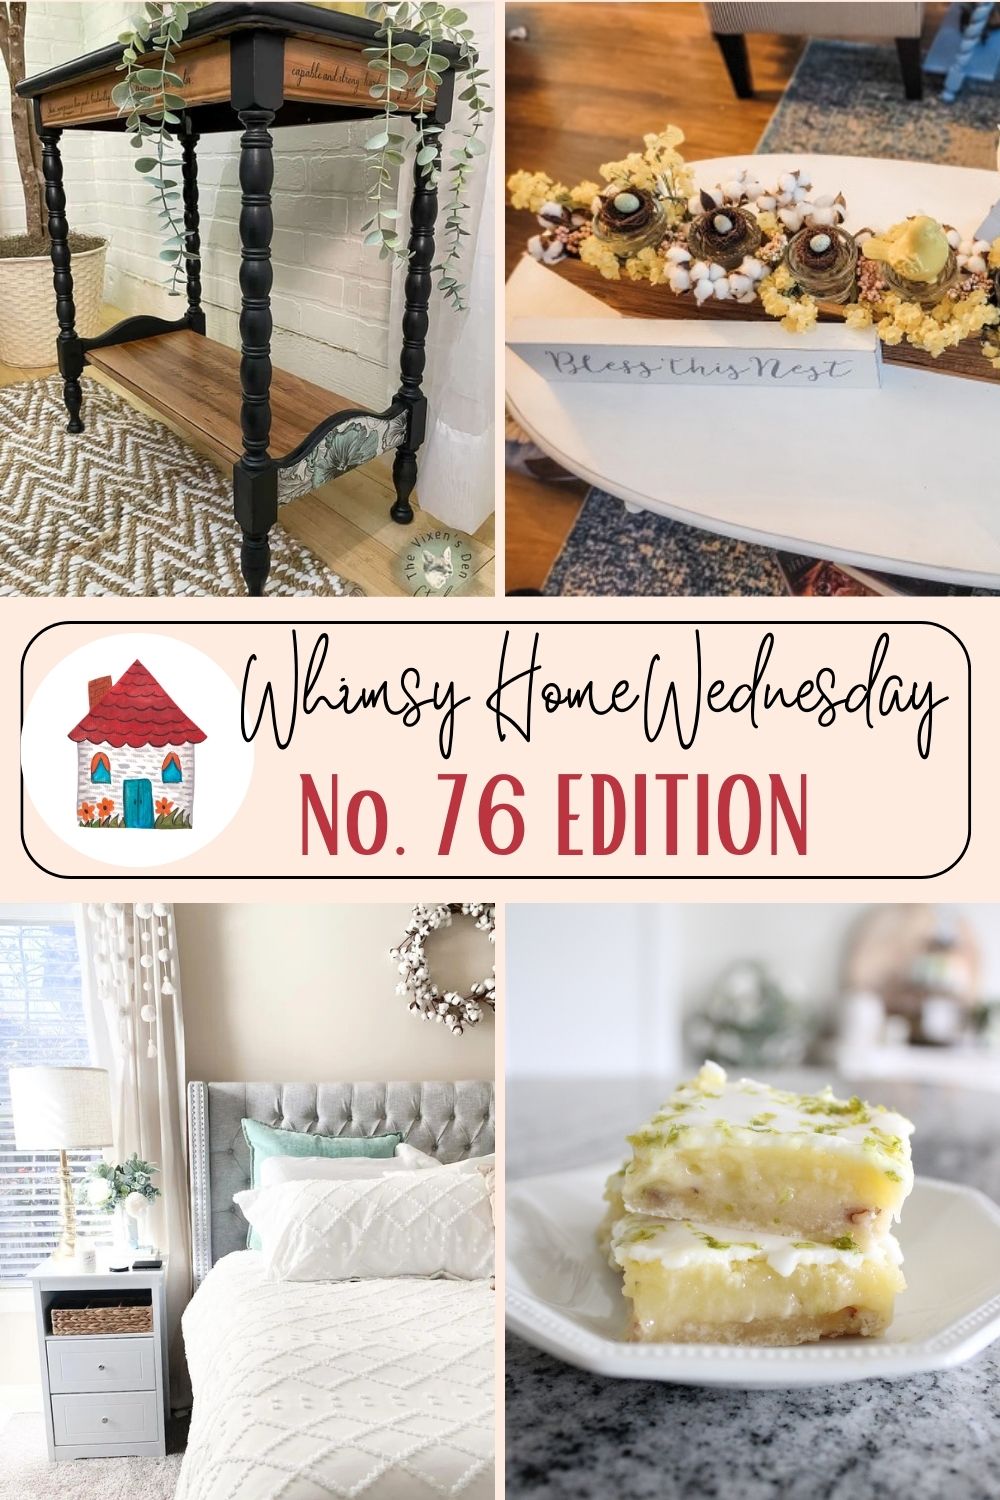 Whimsy Home Wednesday Blog Link Party No. 76